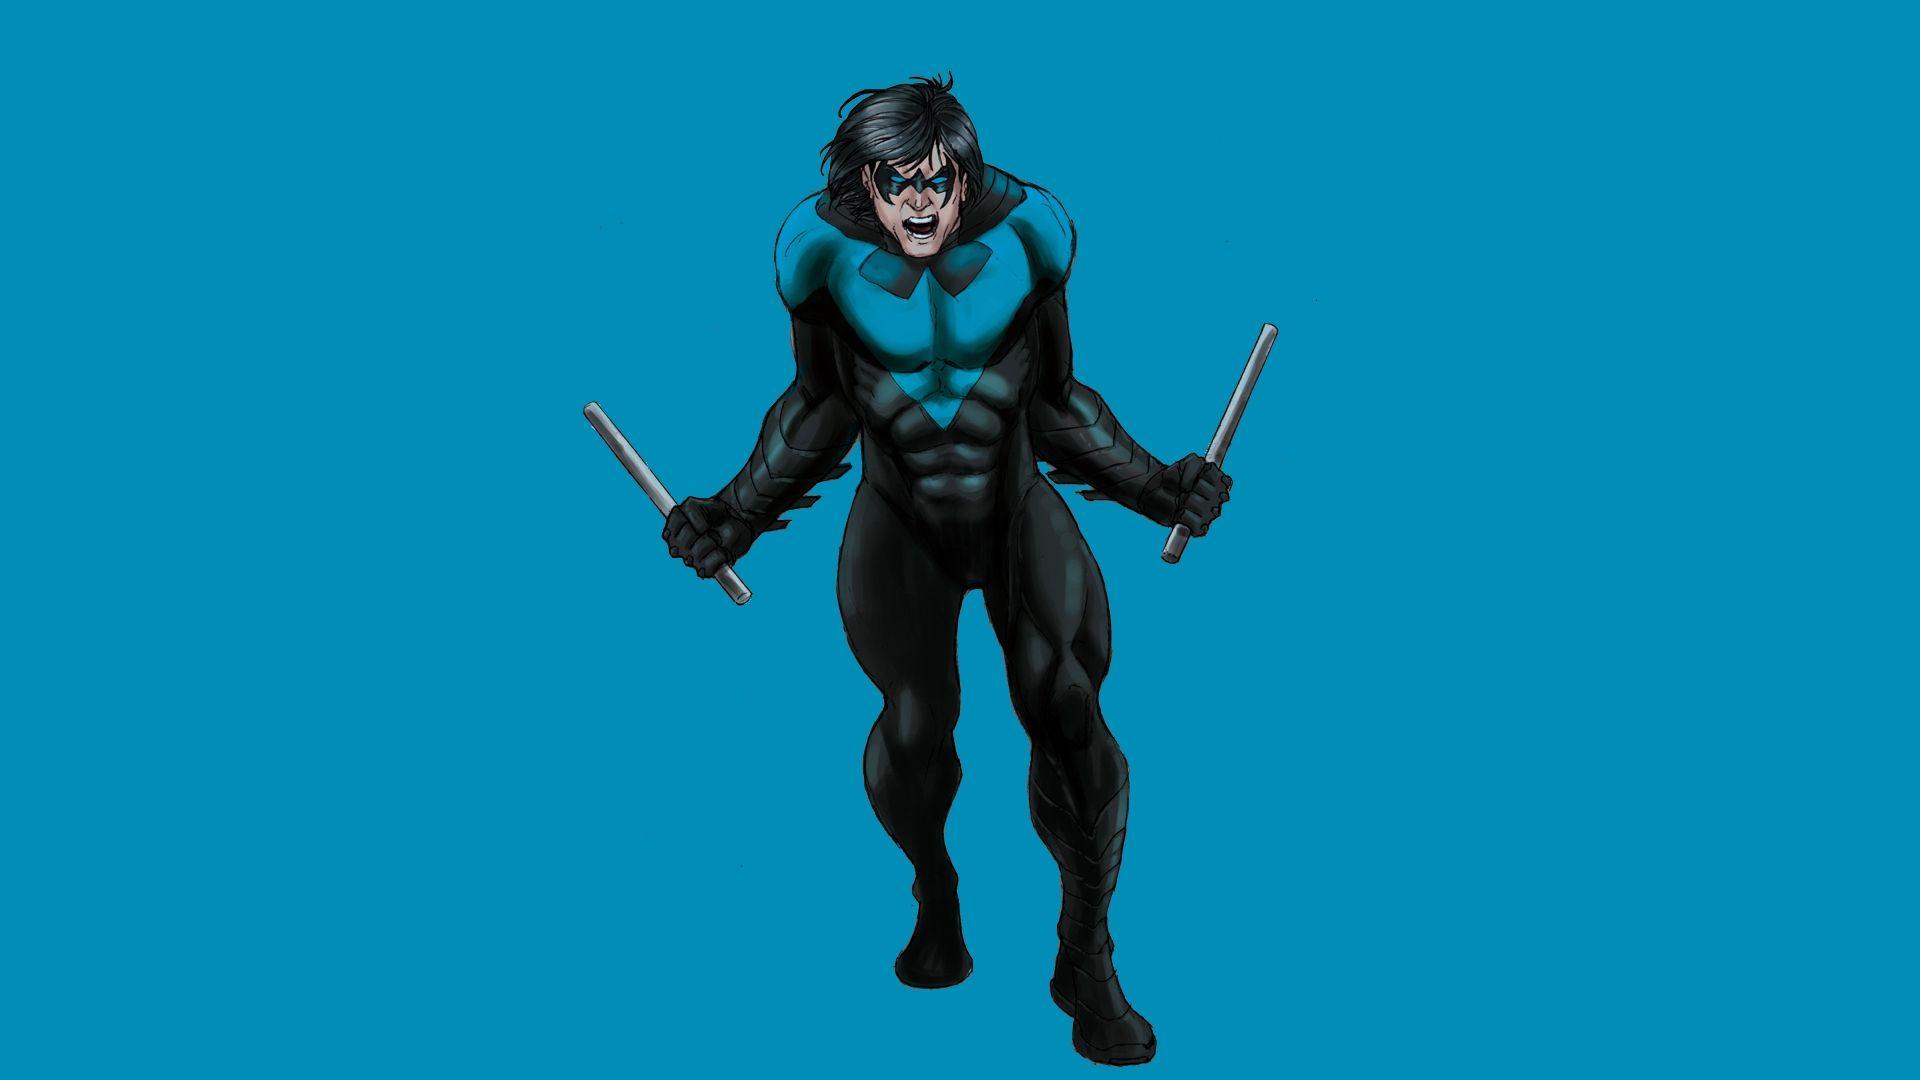 Wallpaper For > Nightwing iPhone Wallpaper